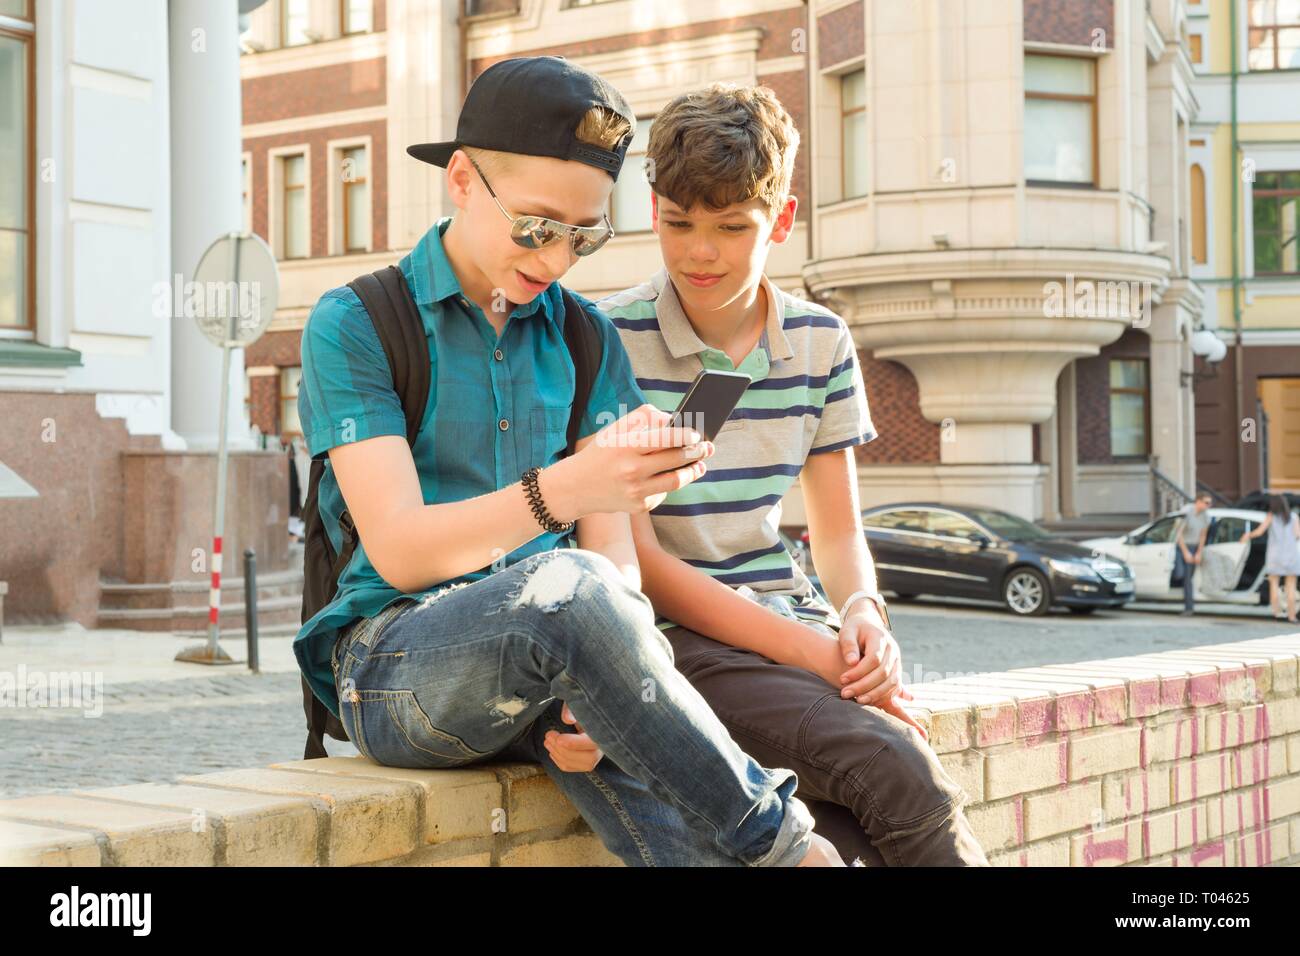 The friendship and communication of two teenage boys is 13, 14 years old, city street background. Stock Photo